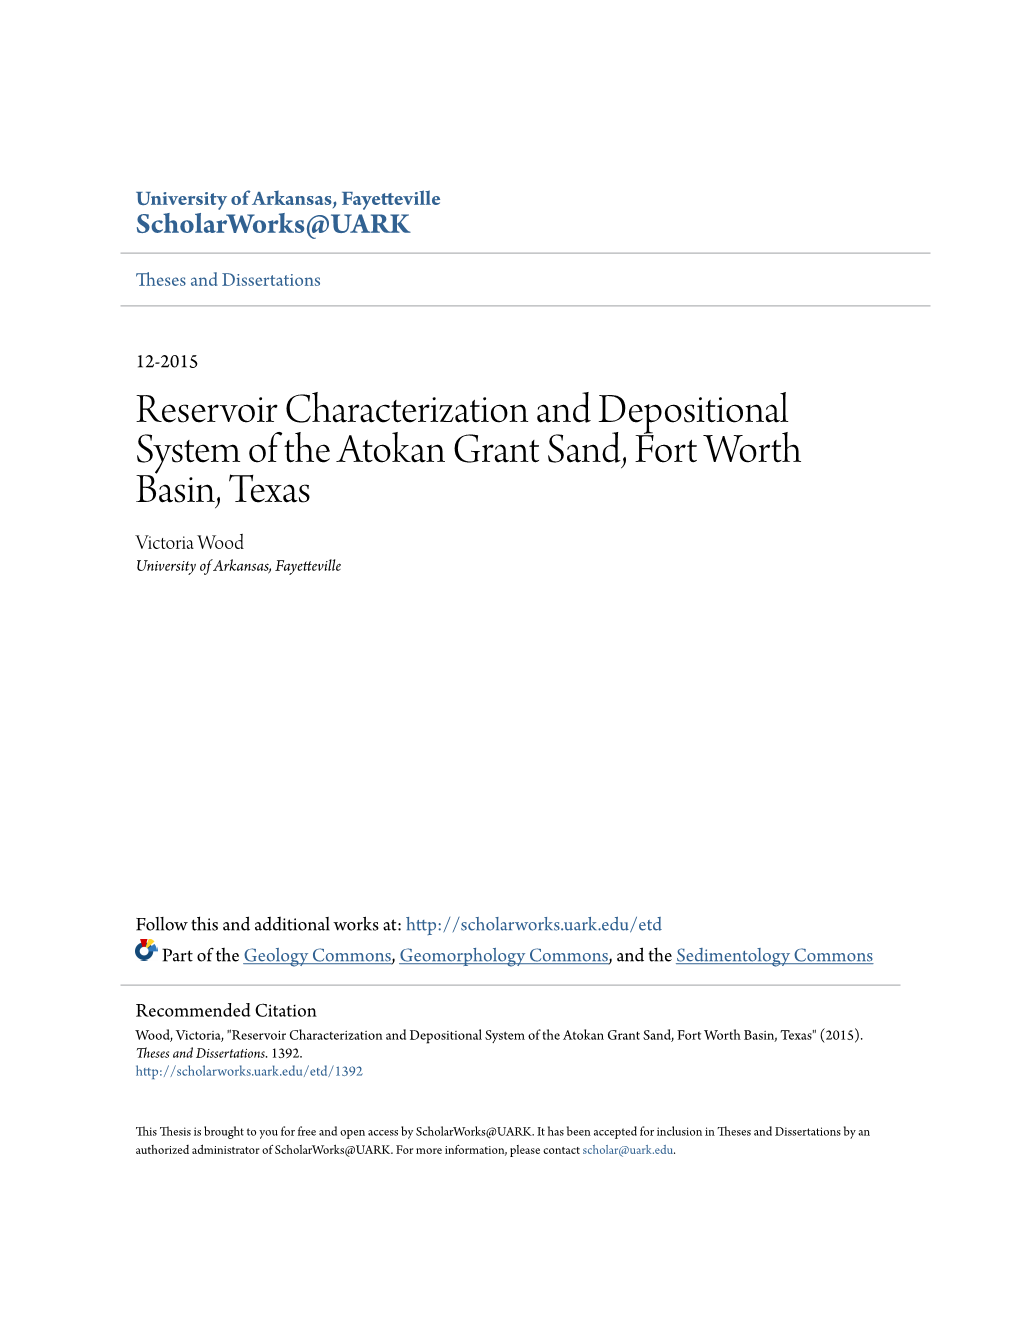 Reservoir Characterization and Depositional System of the Atokan Grant Sand, Fort Worth Basin, Texas Victoria Wood University of Arkansas, Fayetteville